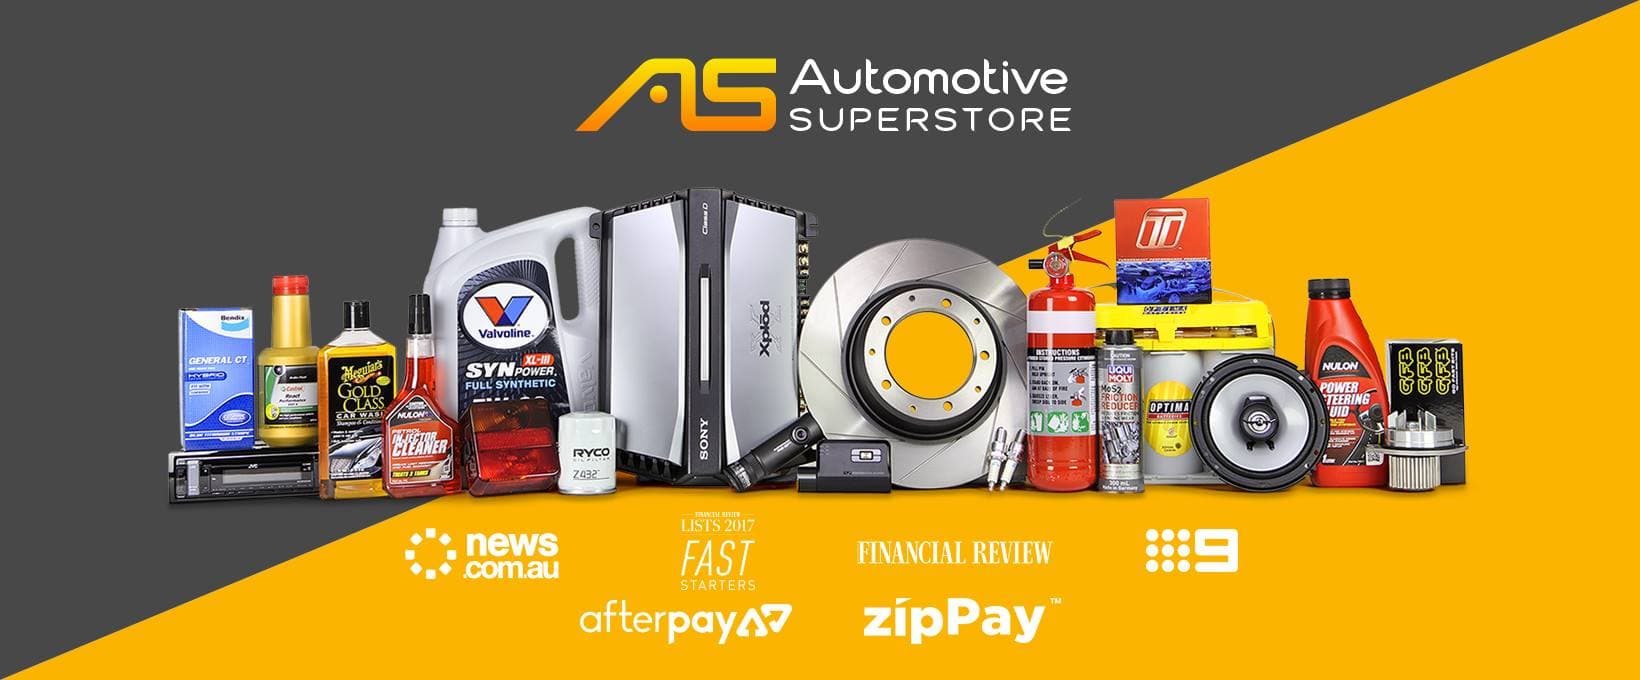 All Automotive Superstore Promo Codes & Coupons